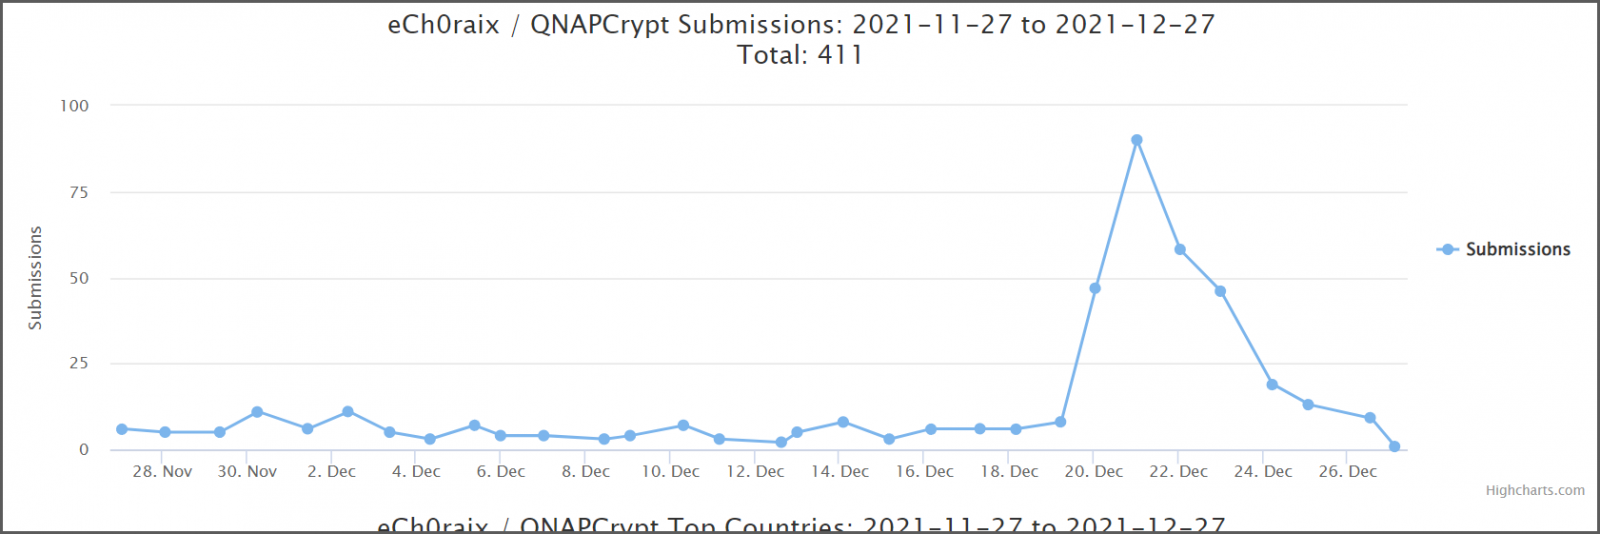 QNAP Spike of ech0raix ransomware submissions on ID Ransomware service